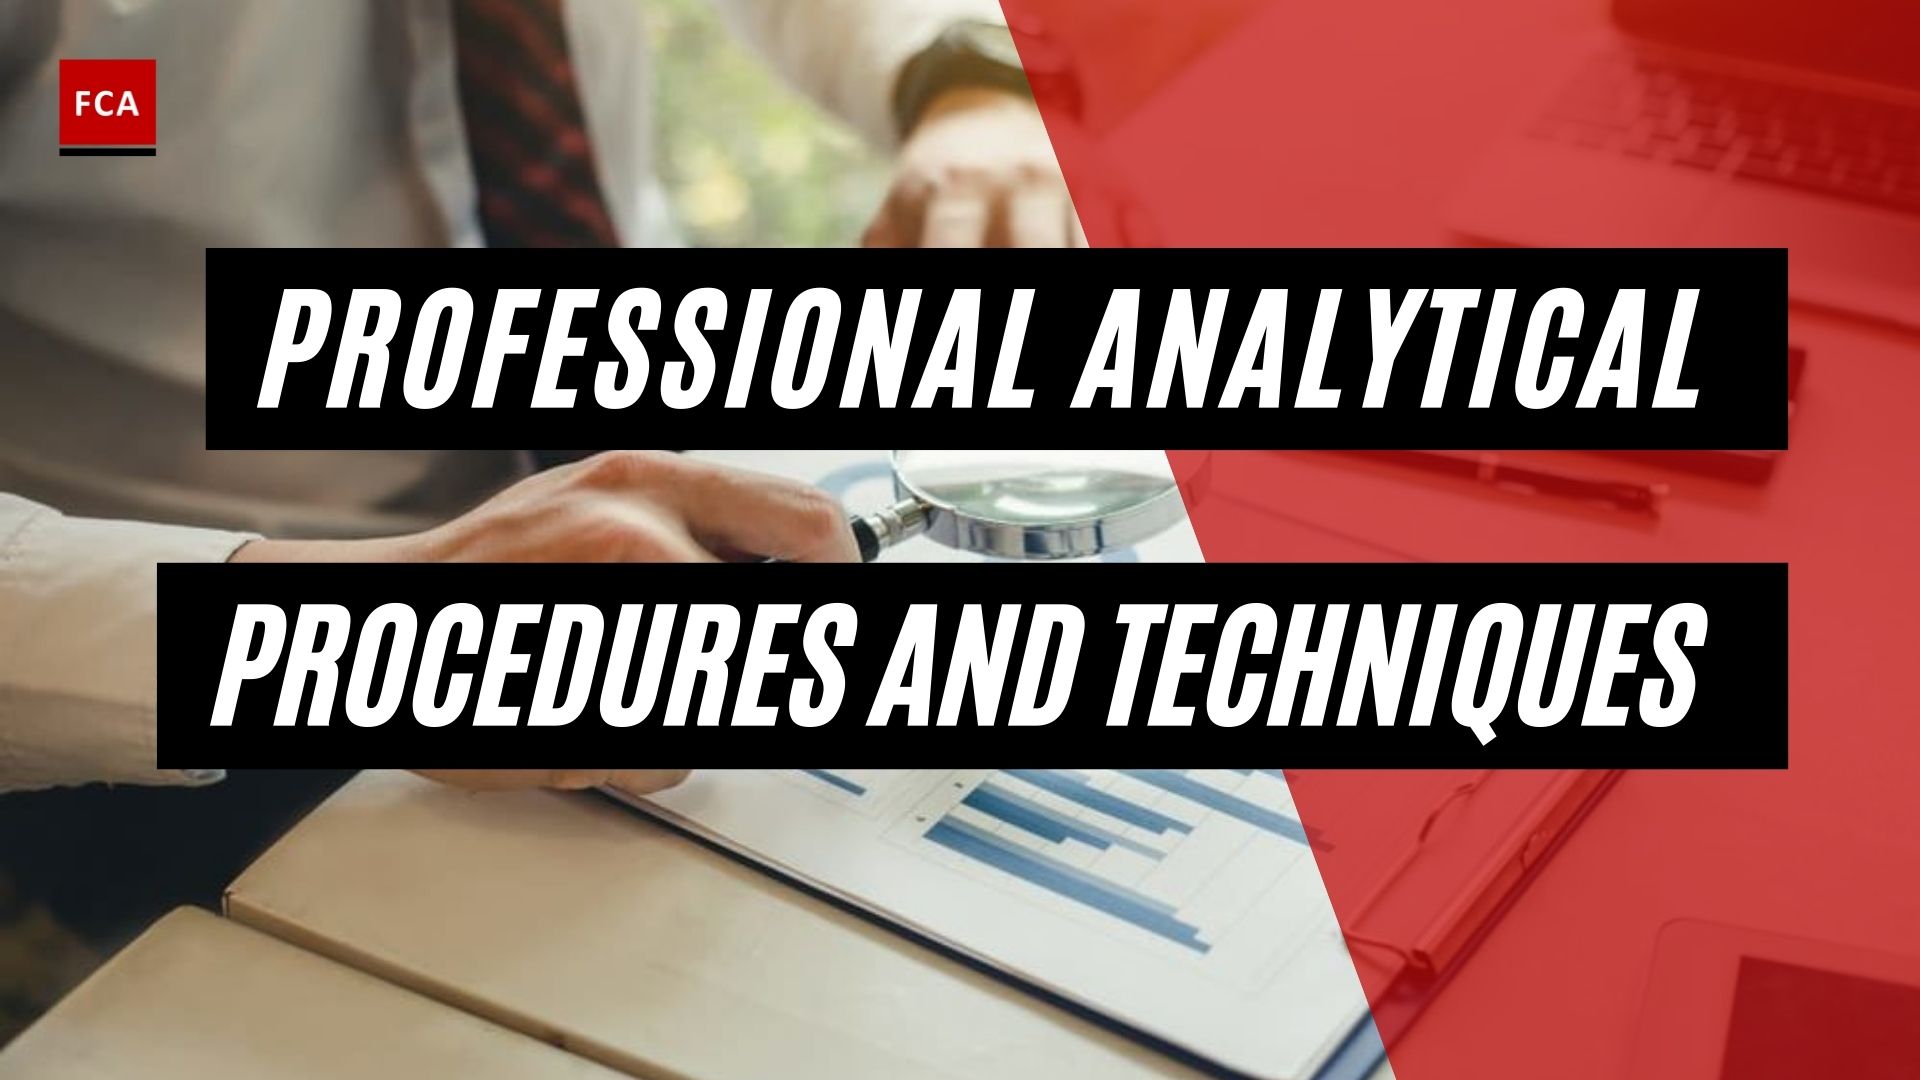 Professional Analytical Procedures And Techniques